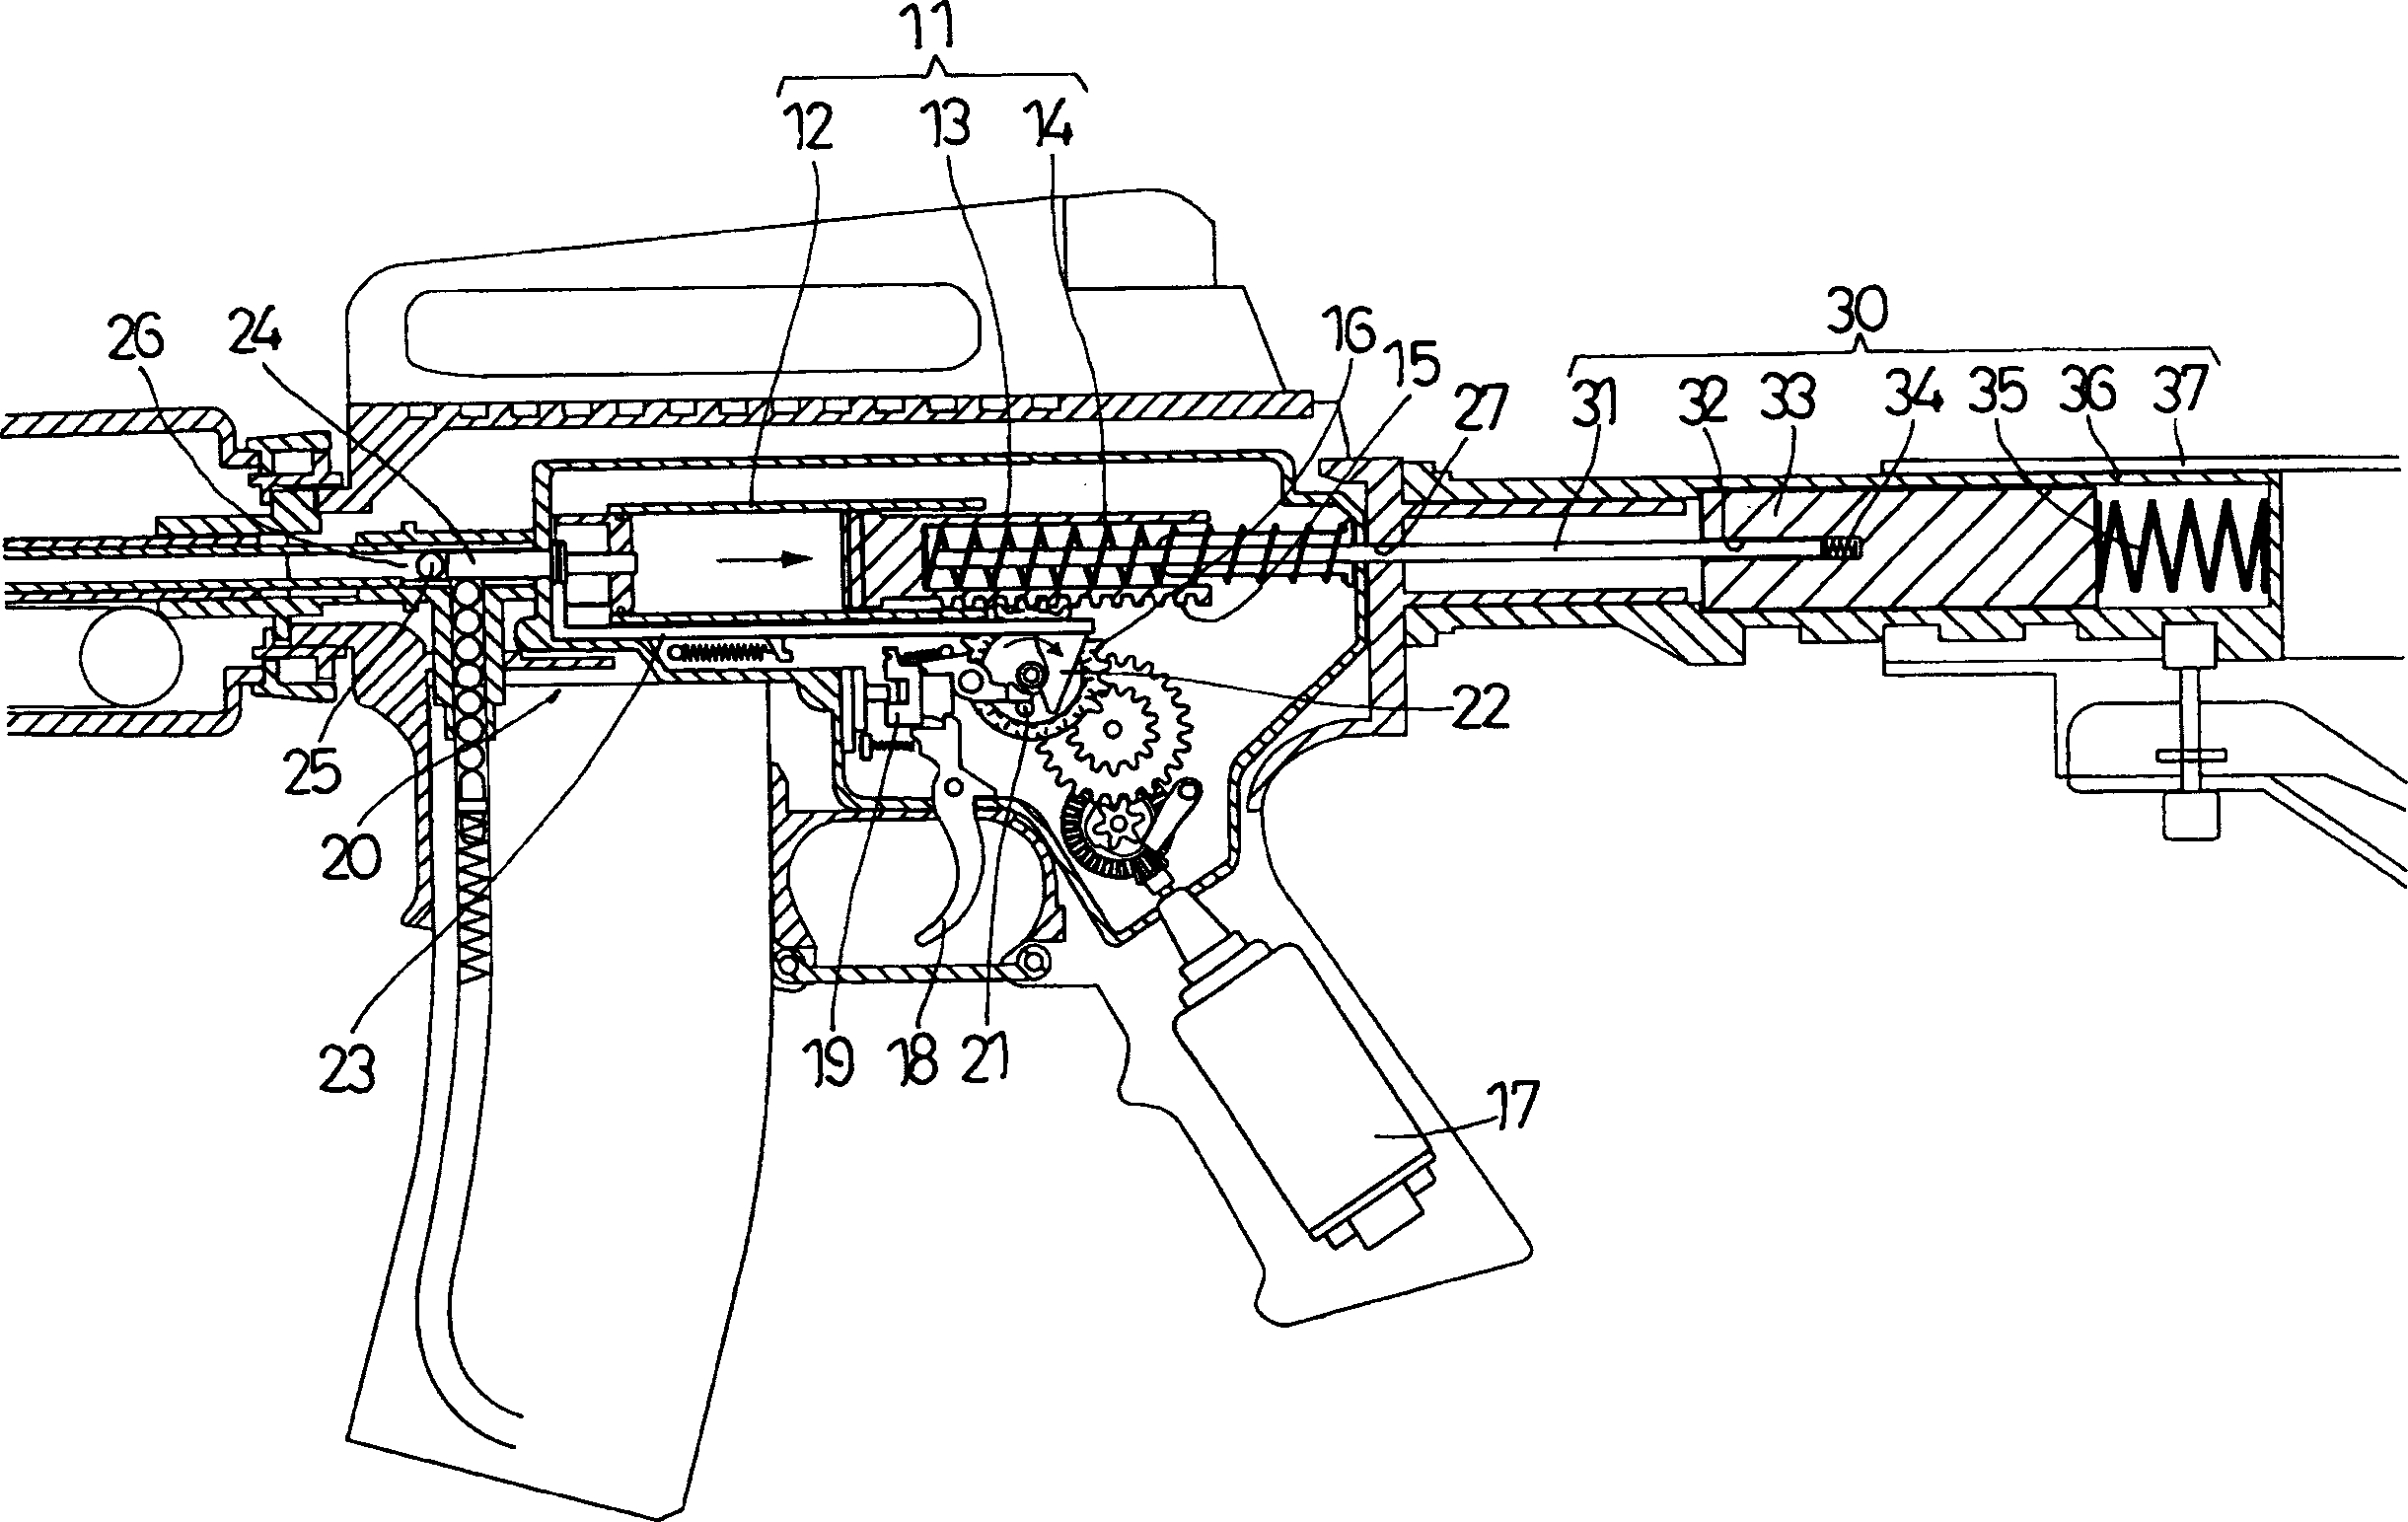 Recoiling device of toy gun